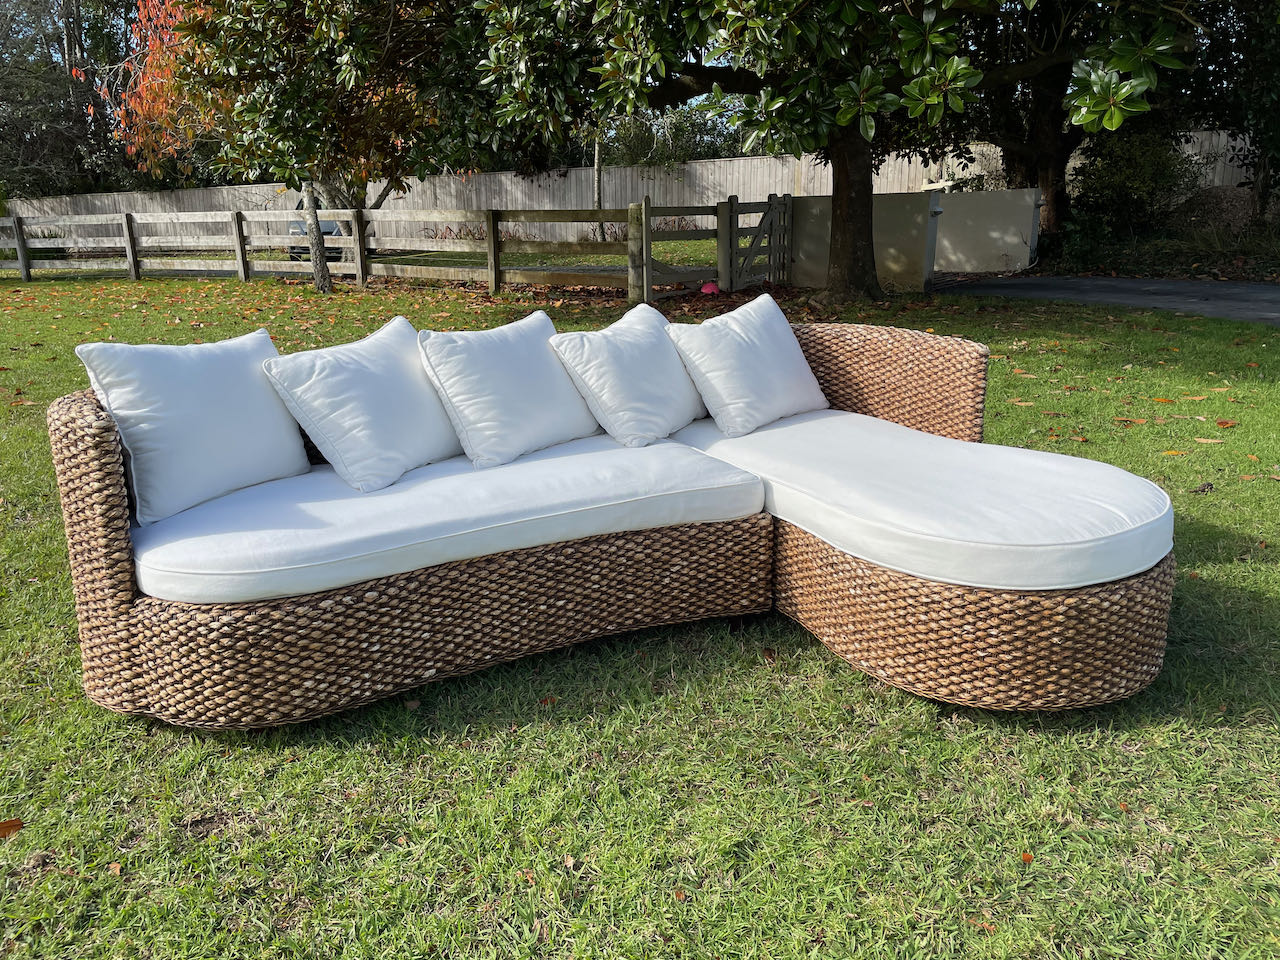 Two-Piece Cane Chaise Sofa, Seats: 4 - 7